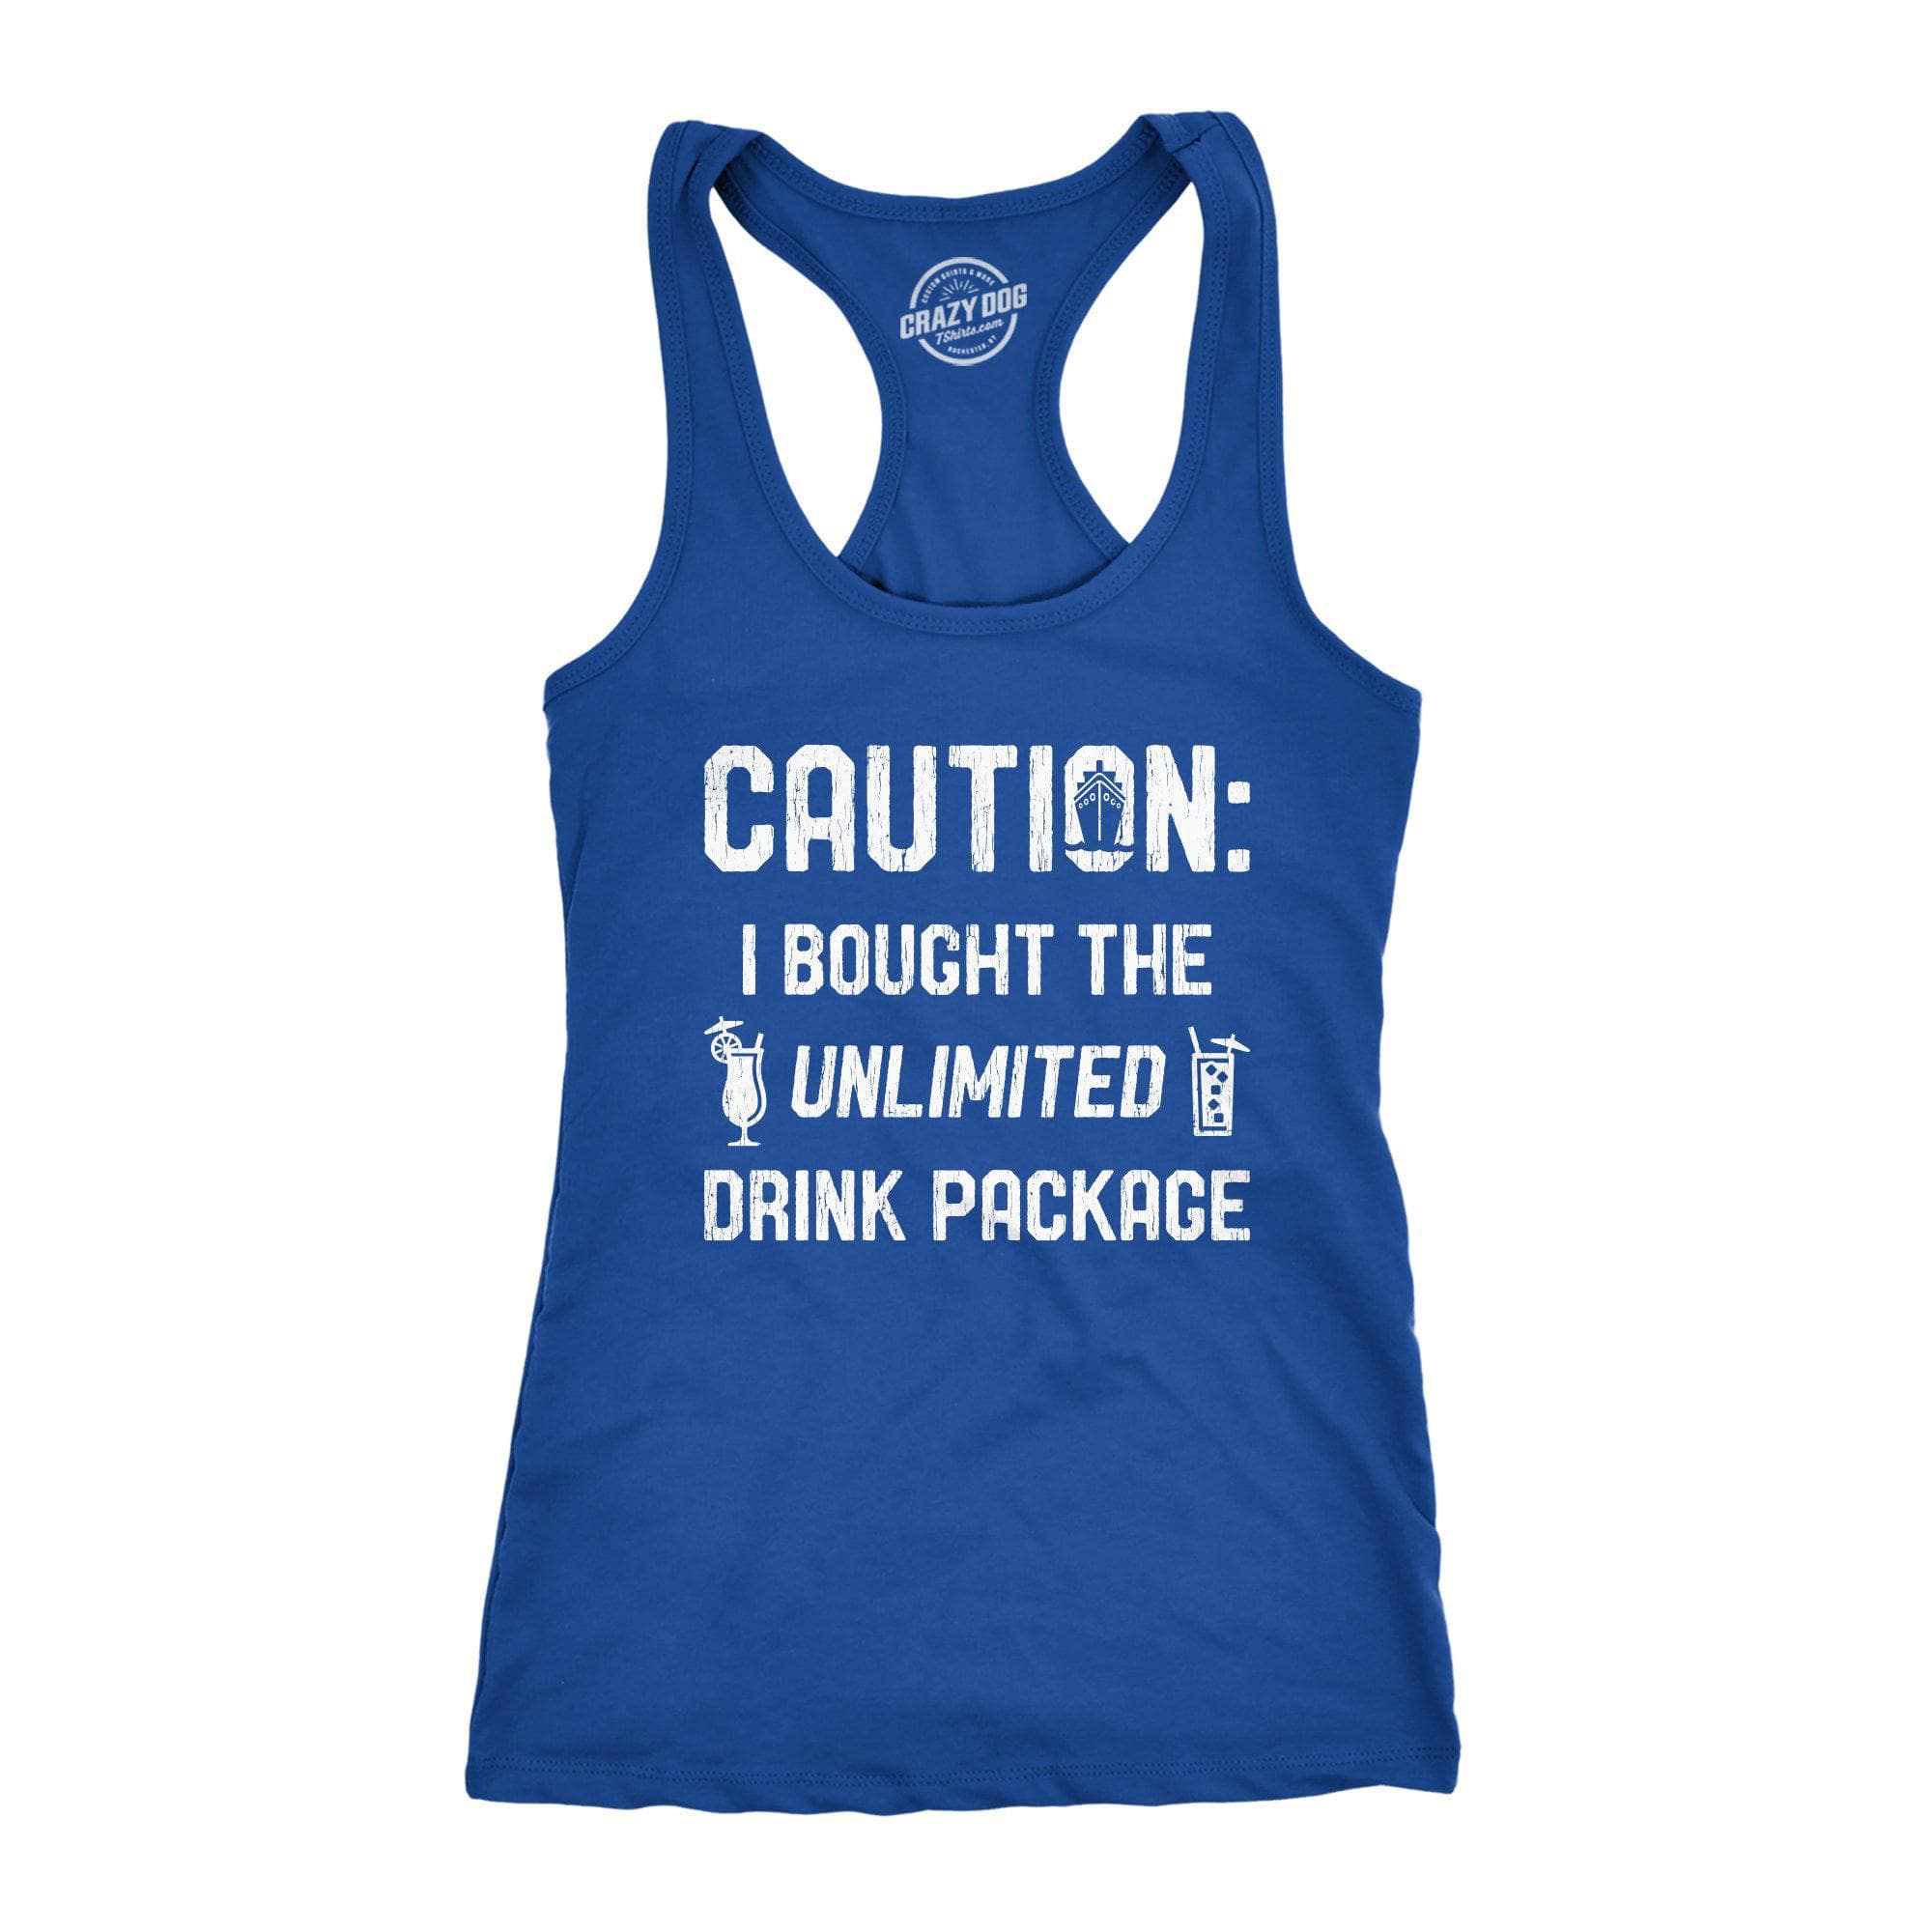 Caution I Bought The Unlimited Drink Package Women's Tank Top  -  Crazy Dog T-Shirts